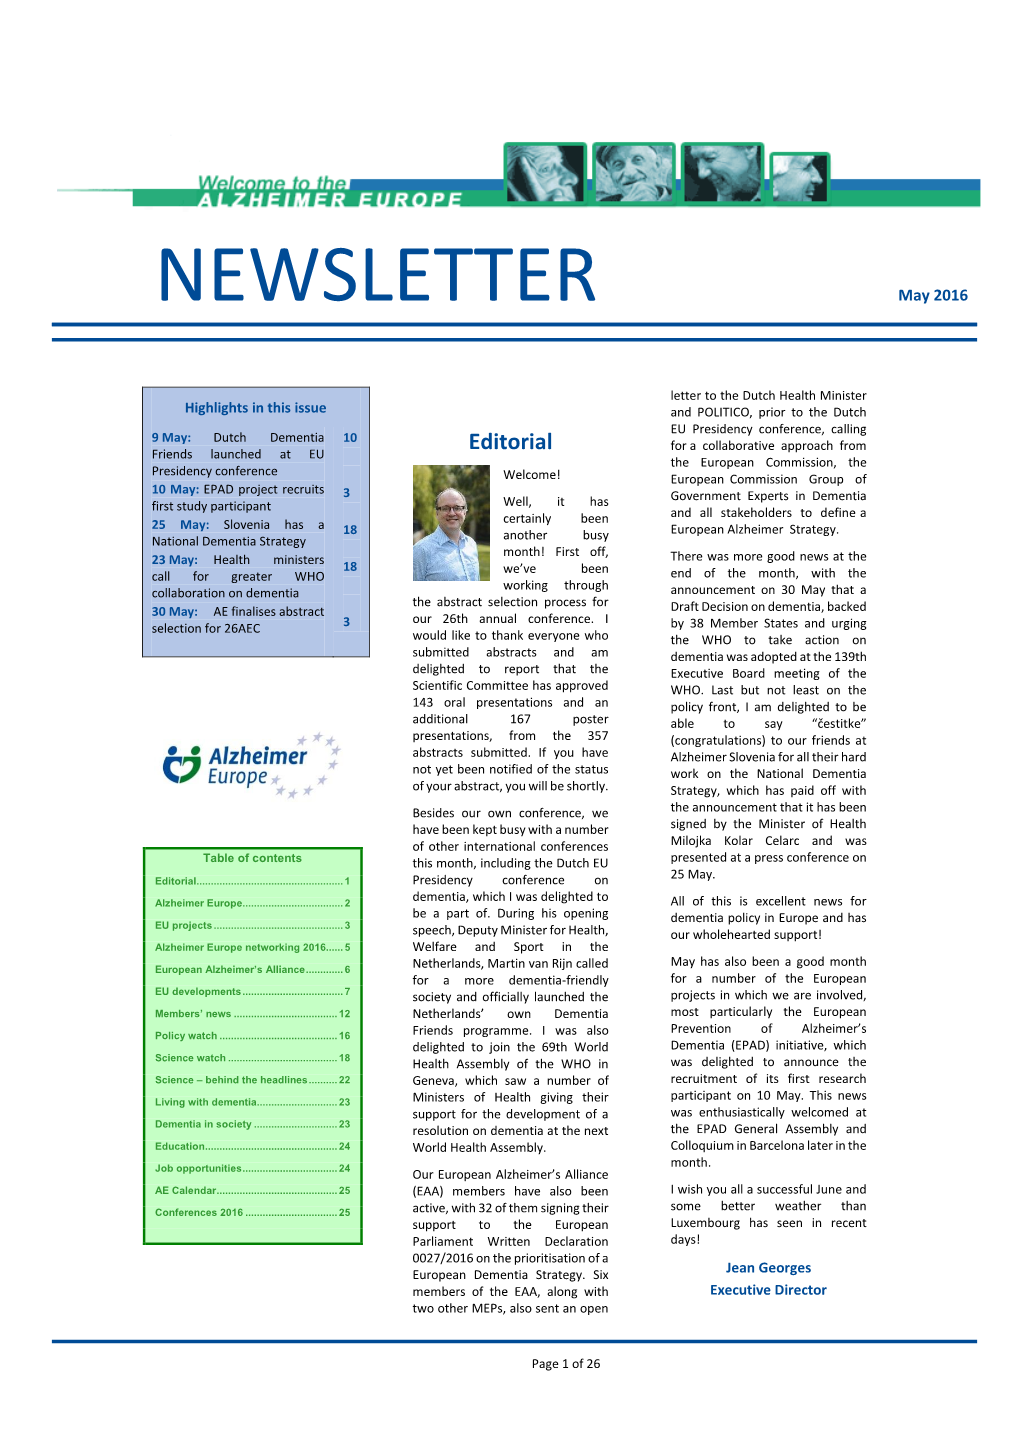 NEWSLETTER May 2016